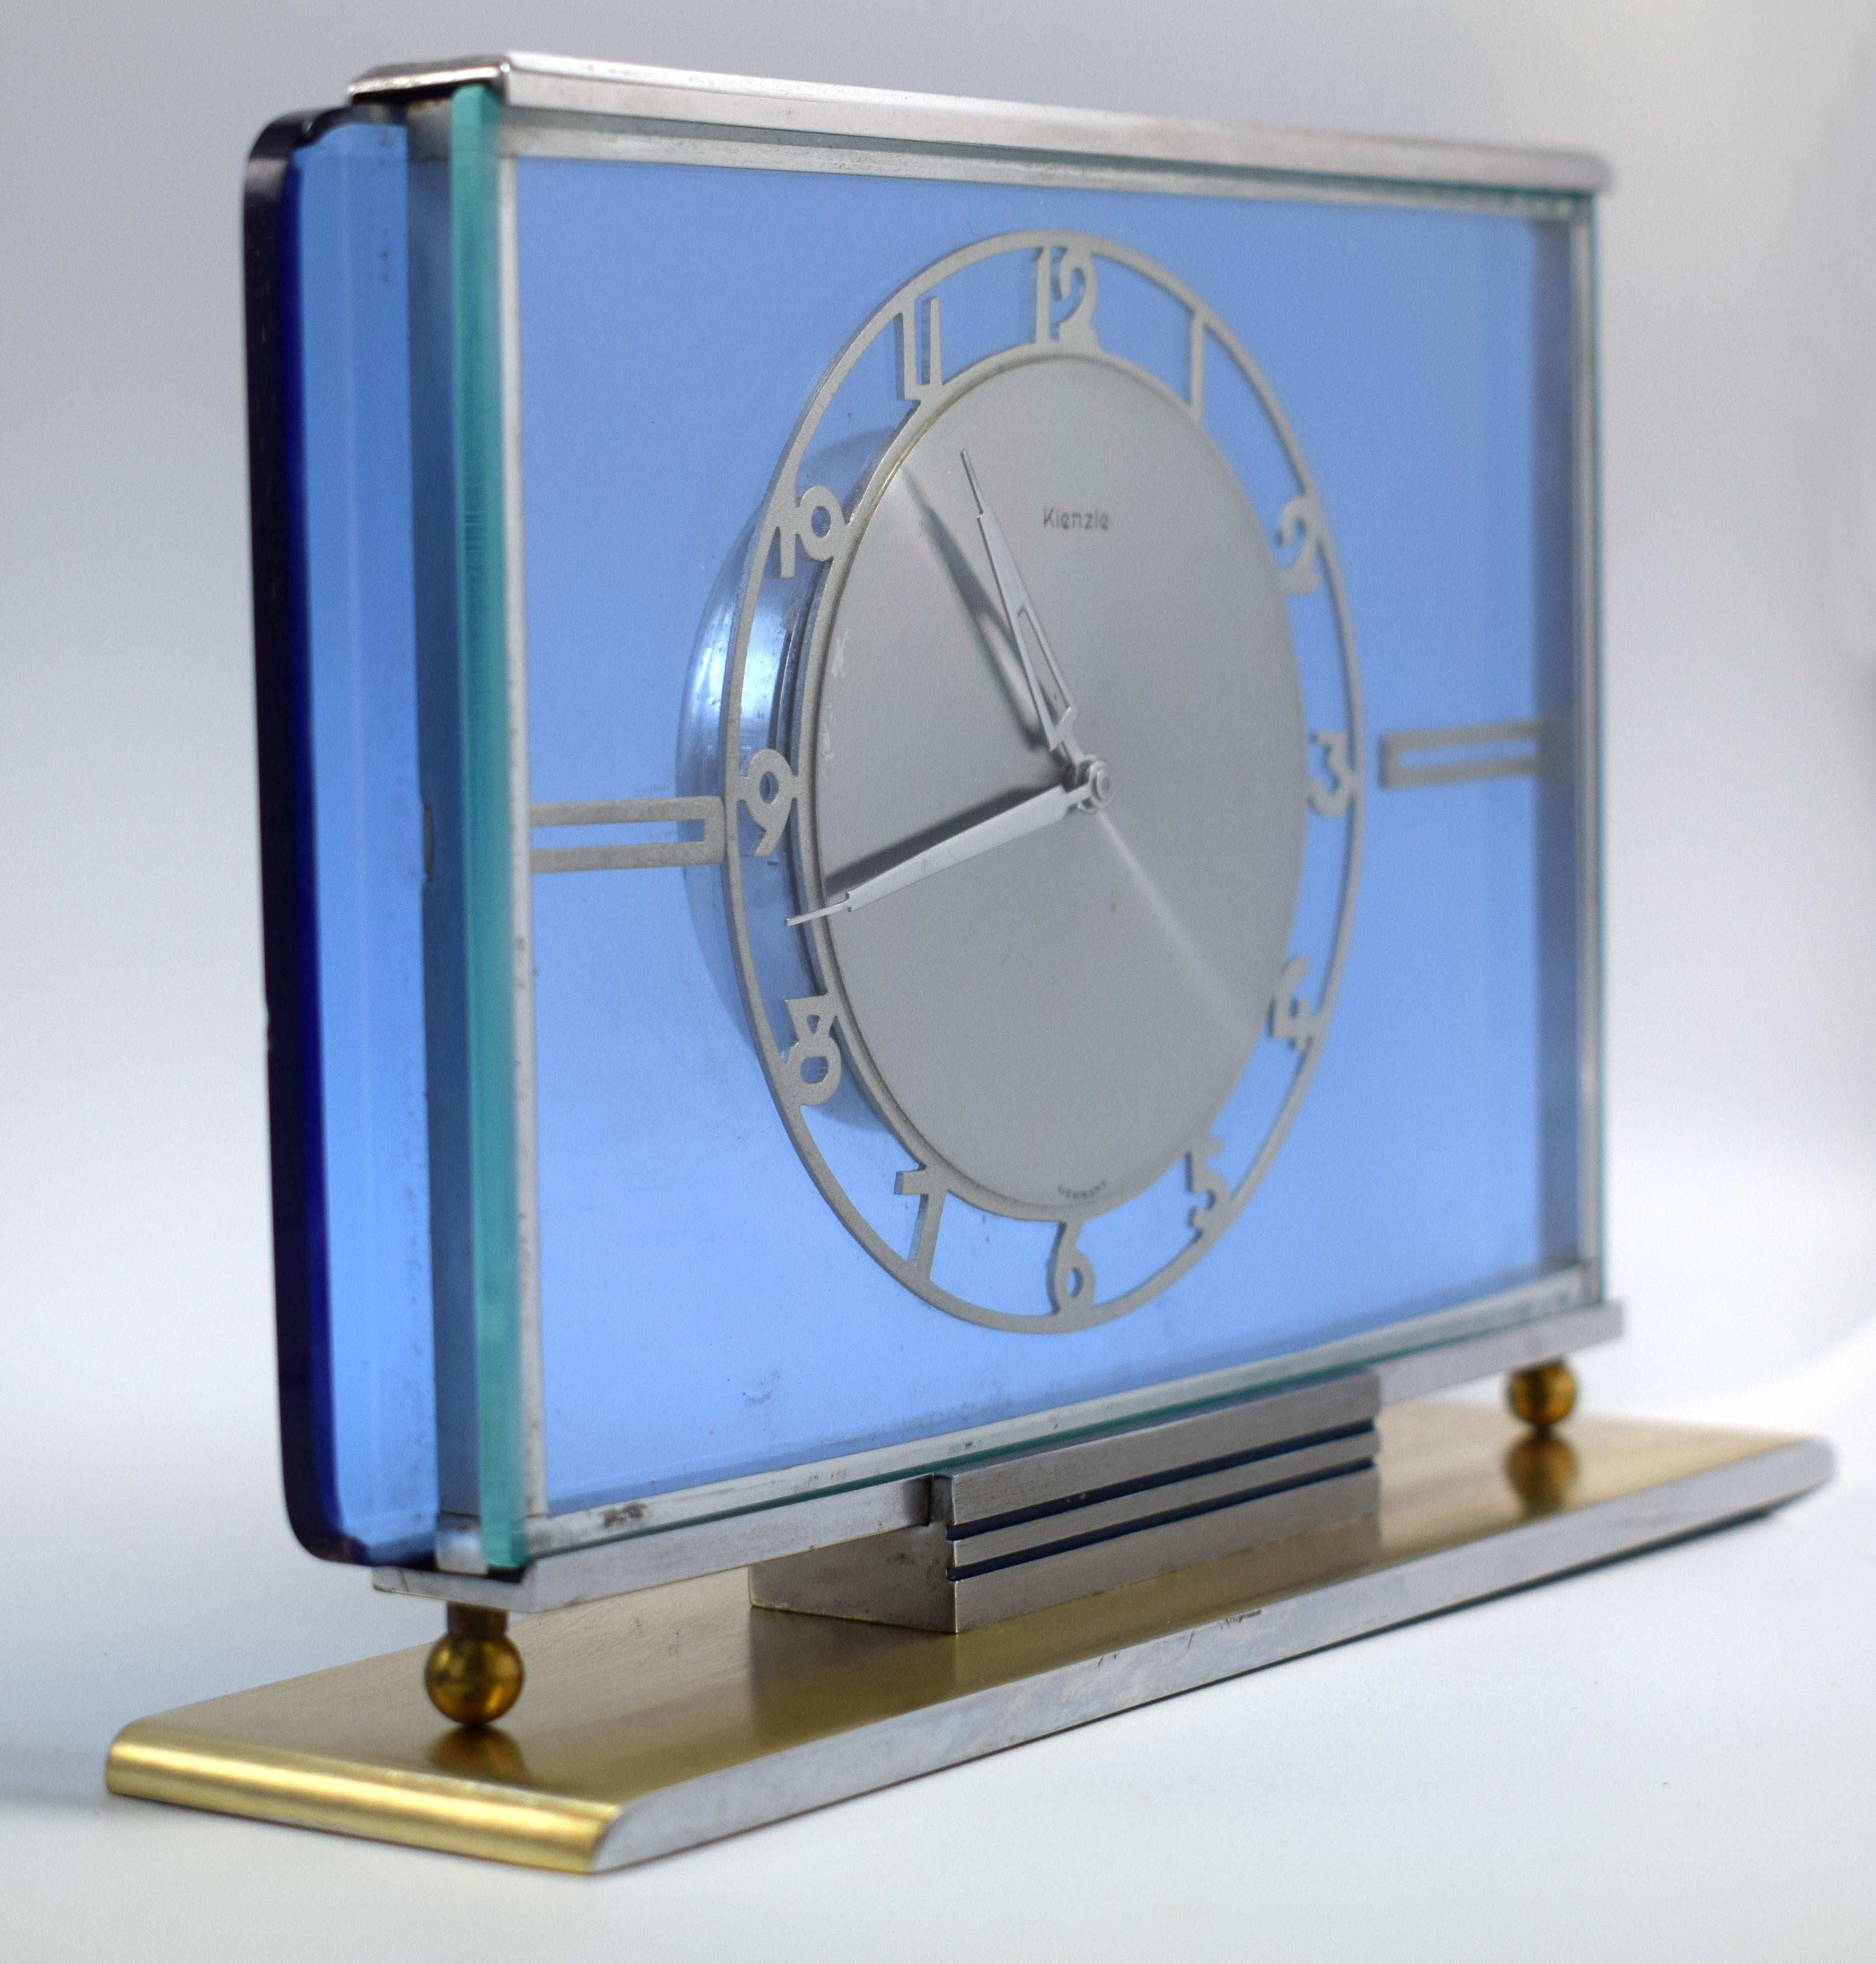 A beautiful and blue glass and silvered dial 8 day mantel clock manufactured by Kienzle, a fine example of the Art Deco style. Very attractive time piece. We've had this clock fully serviced and cleaned and so comes to you in full working order.